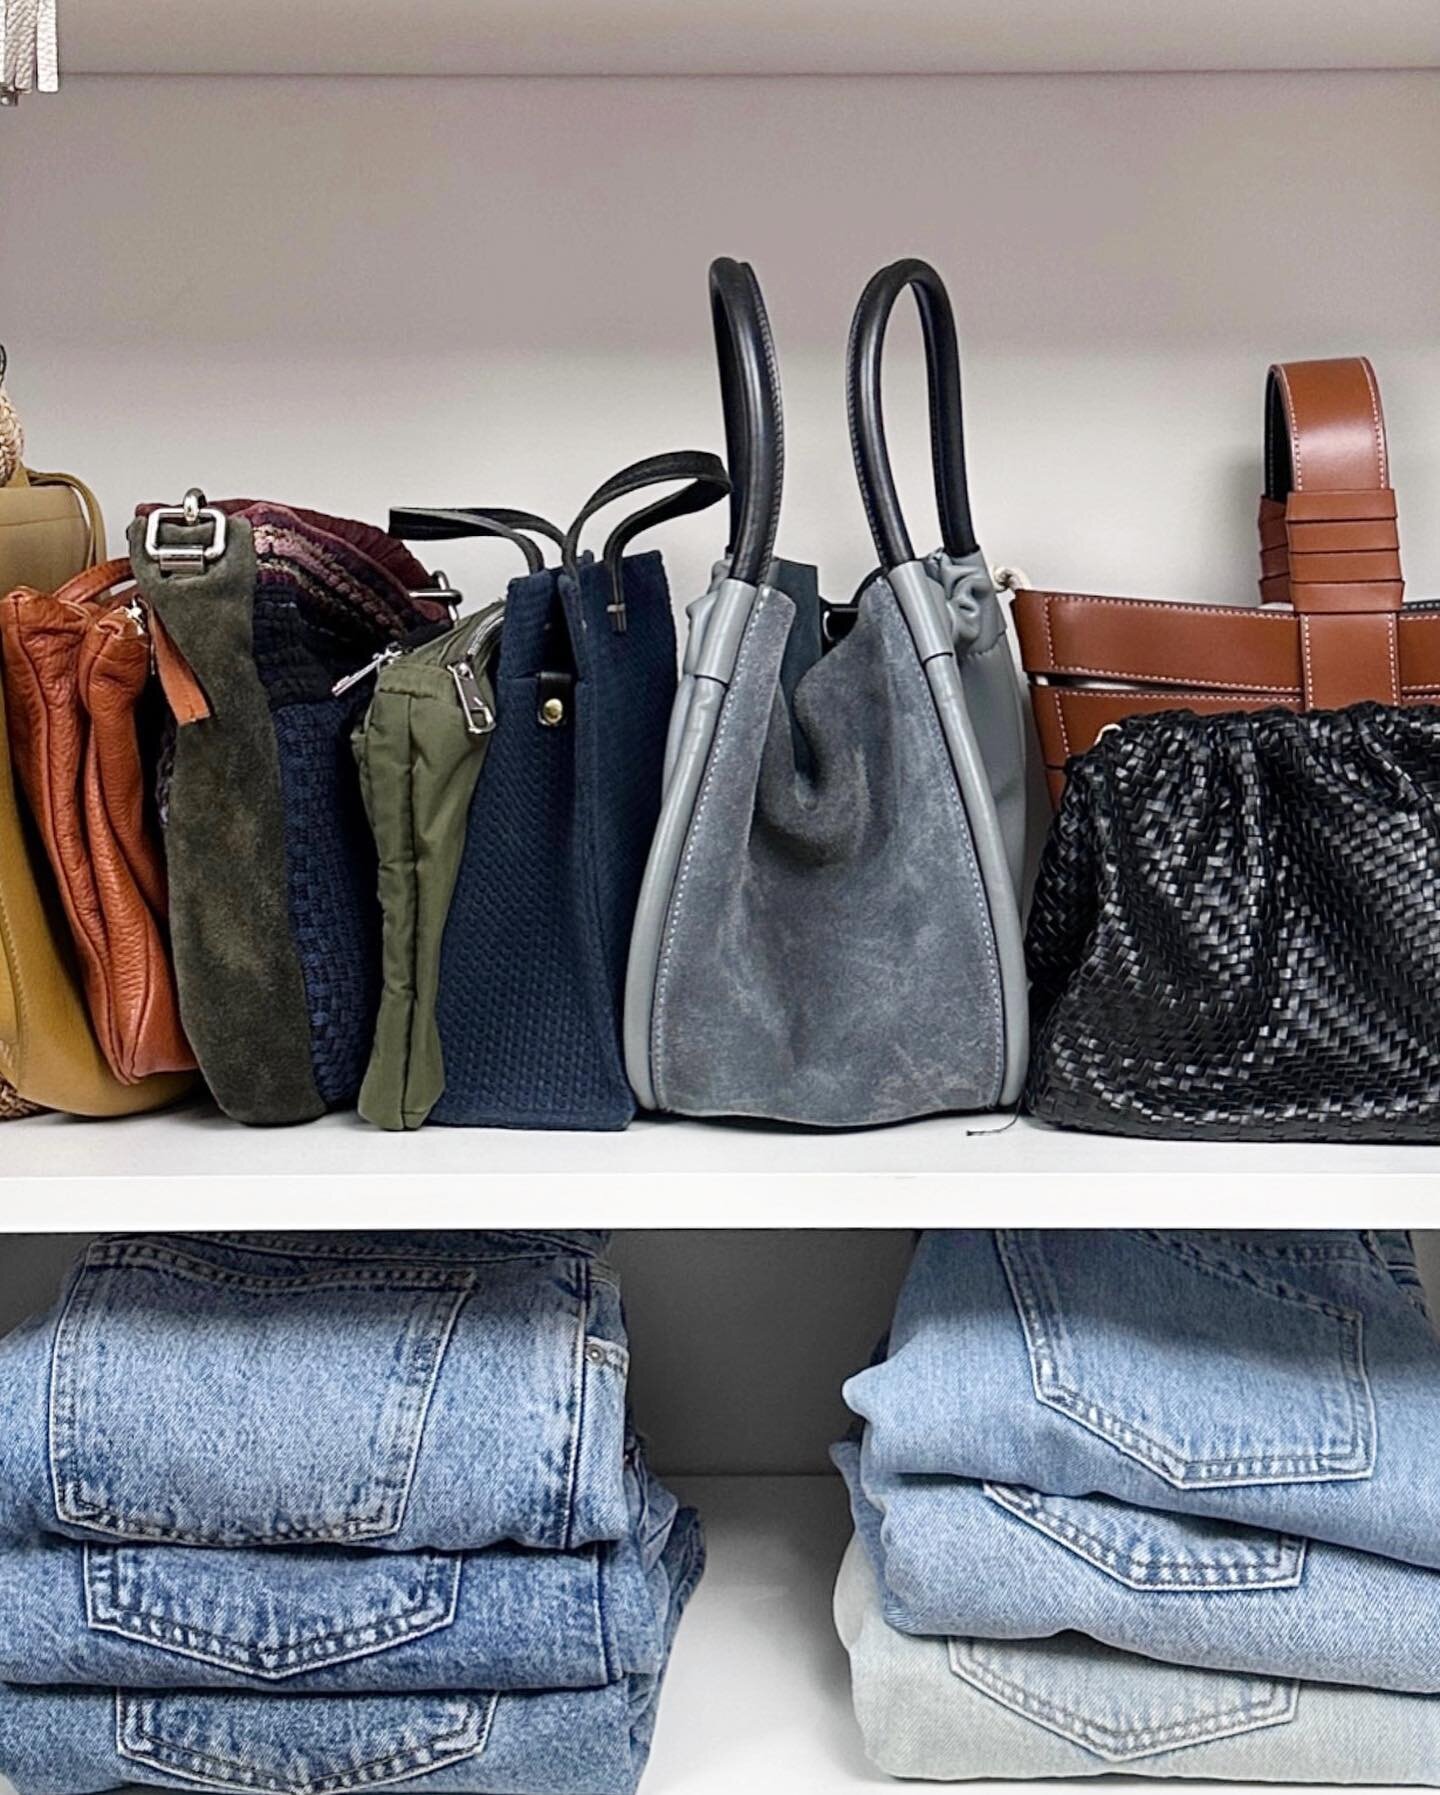 3 Easy Closet-Organizing Tips will change your life for the better. Find what you need. Use what you own. And save time getting ready. Here&rsquo;s how.

1. Creating small, short stacks of jeans, sweaters, etc., will allow you to see and quickly acce